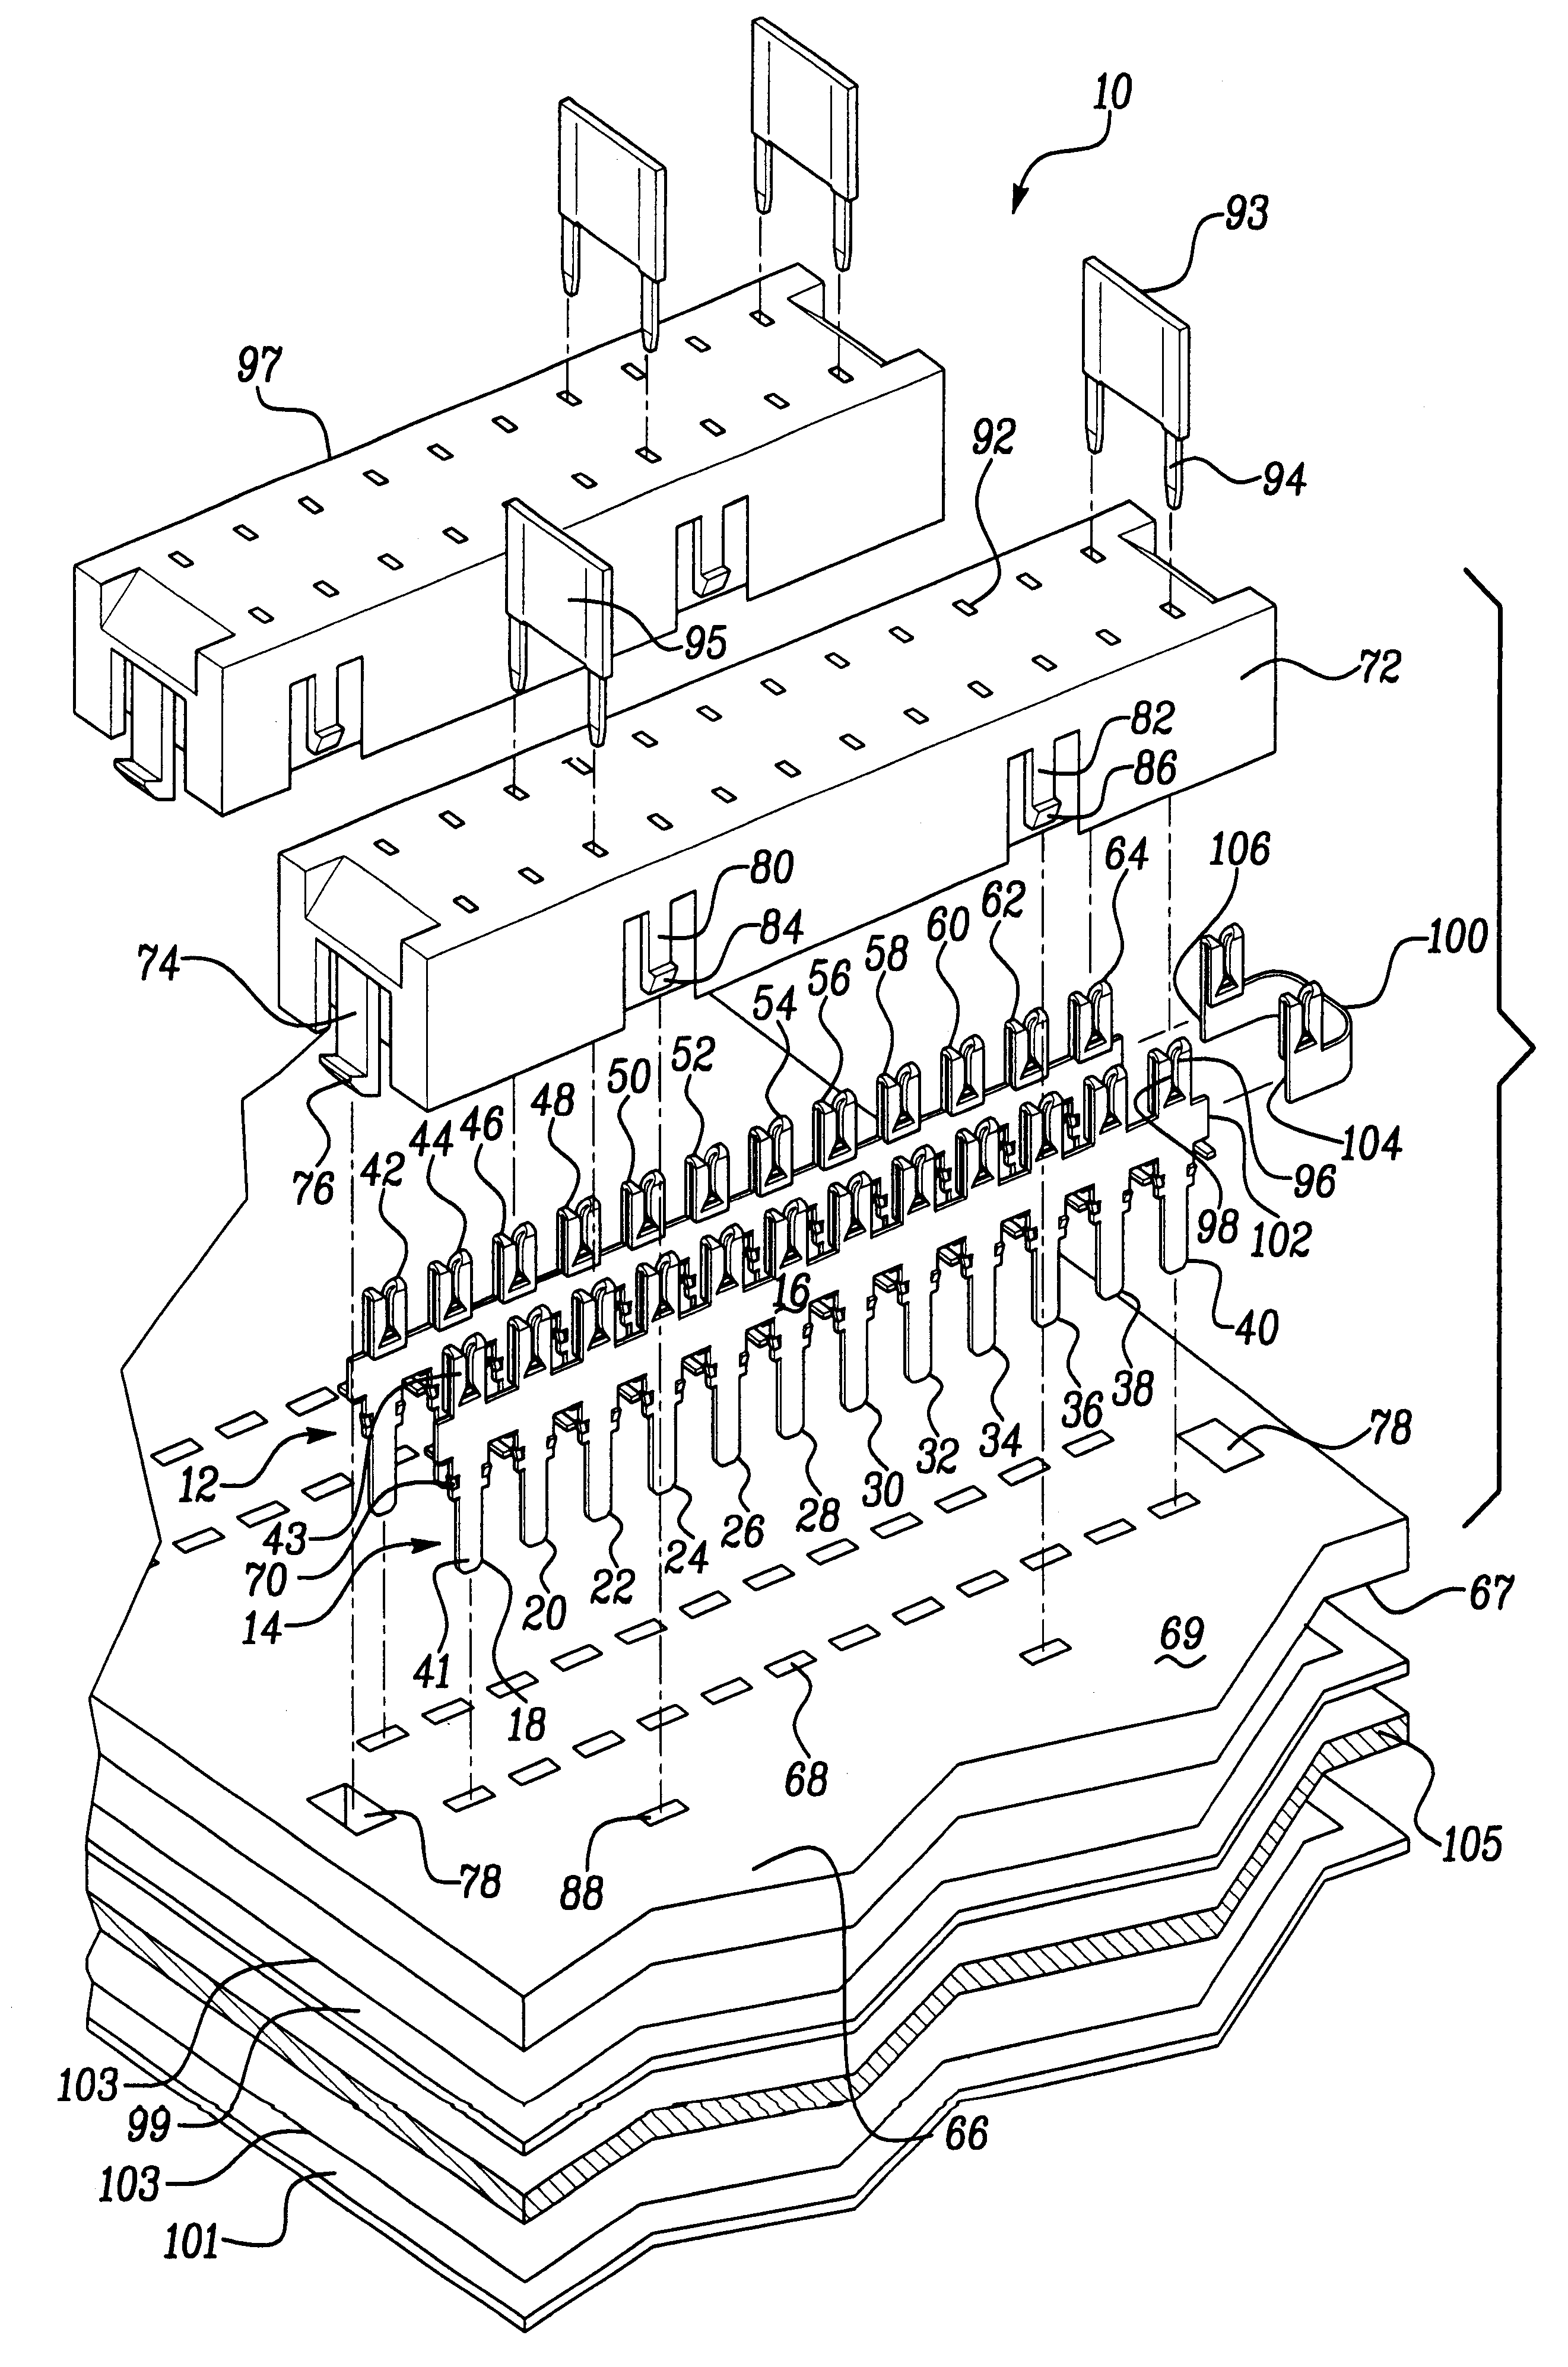 Method and apparatus for selectively connecting electrical circuits and components